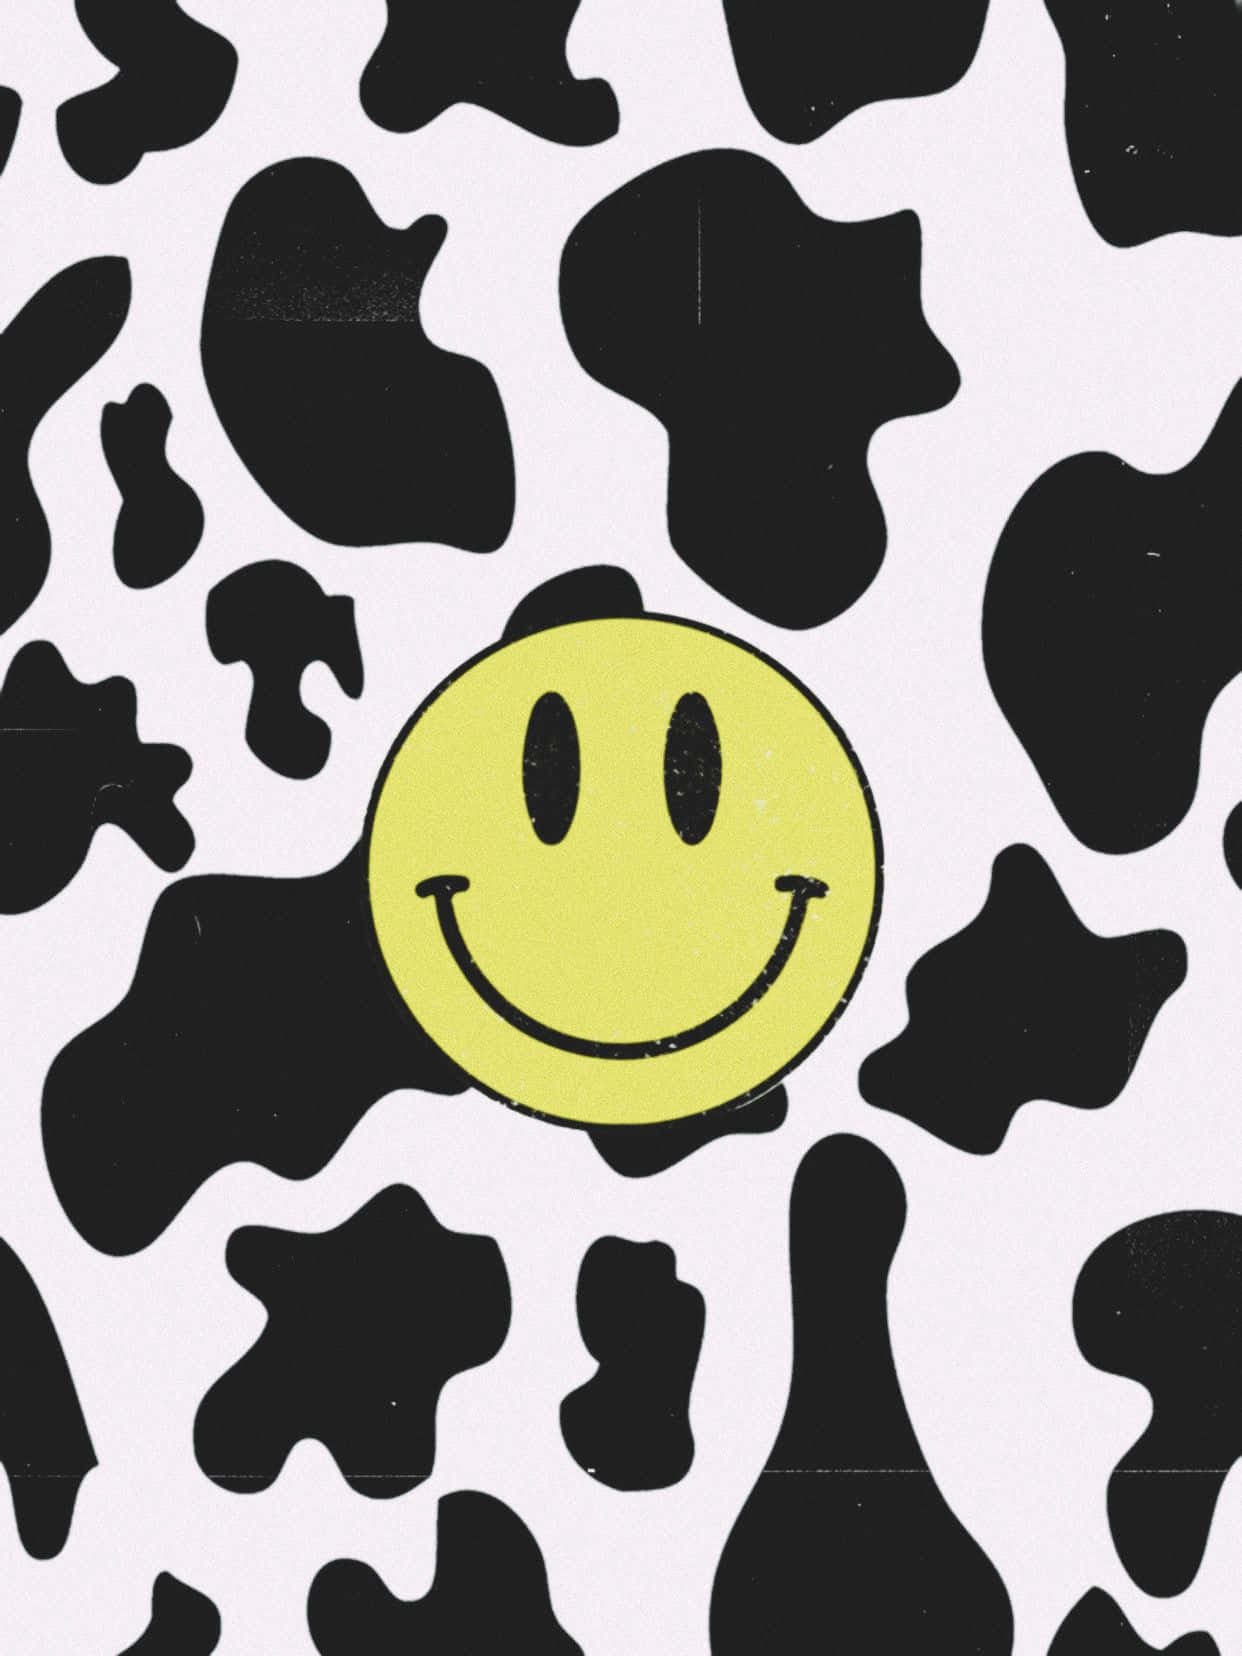 Check Out the New&Stylish Cow Themed Iphone Wallpaper